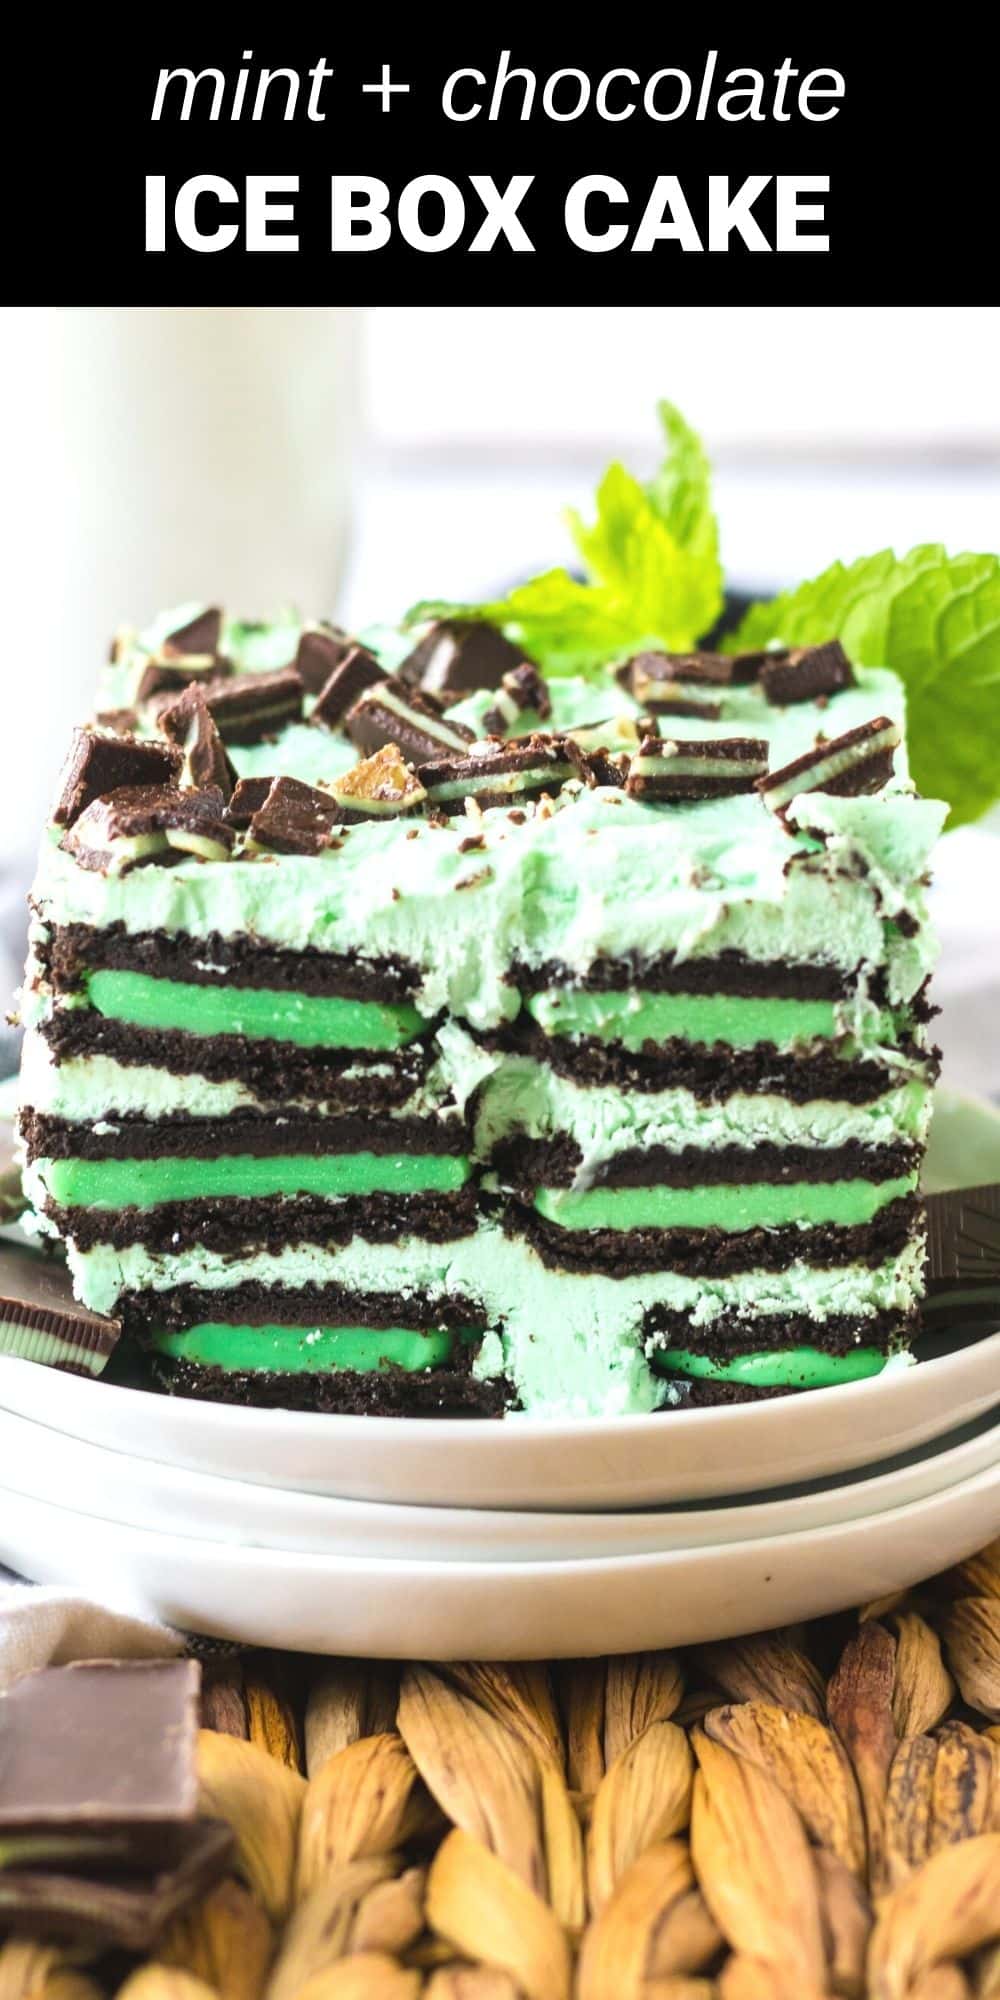 This delightfully delicious Mint Chocolate Icebox Cake features a classic combination of mint and rich chocolate flavors. With a no-bake preparation, you can make this completely irresistible sweet treat with very little effort. 